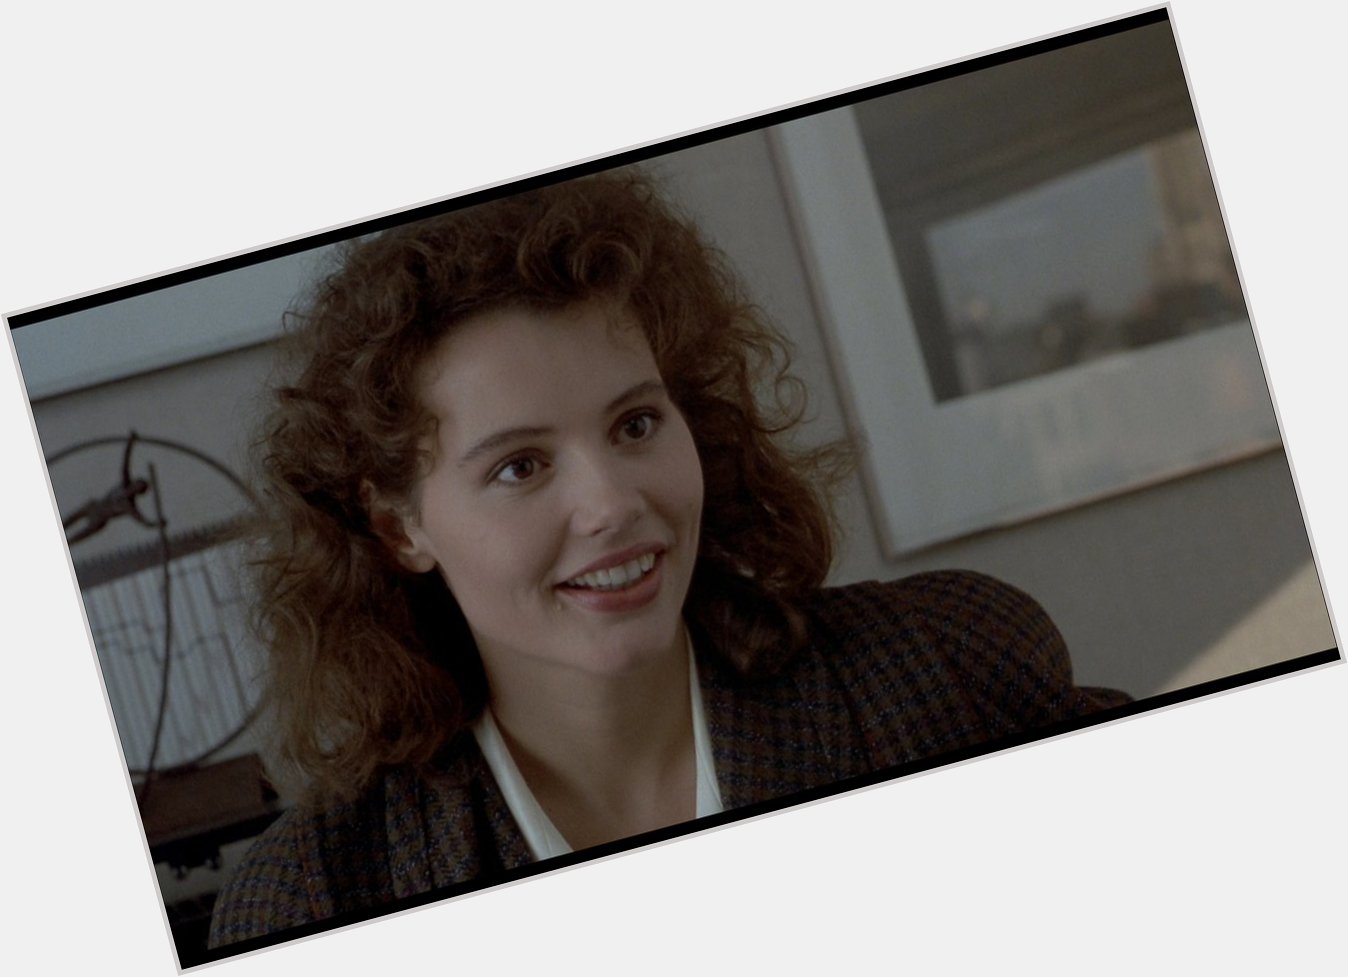 Happy birthday to actress GEENA DAVIS, born today in 1956, star of BEETLEJUICE and THE FLY! 